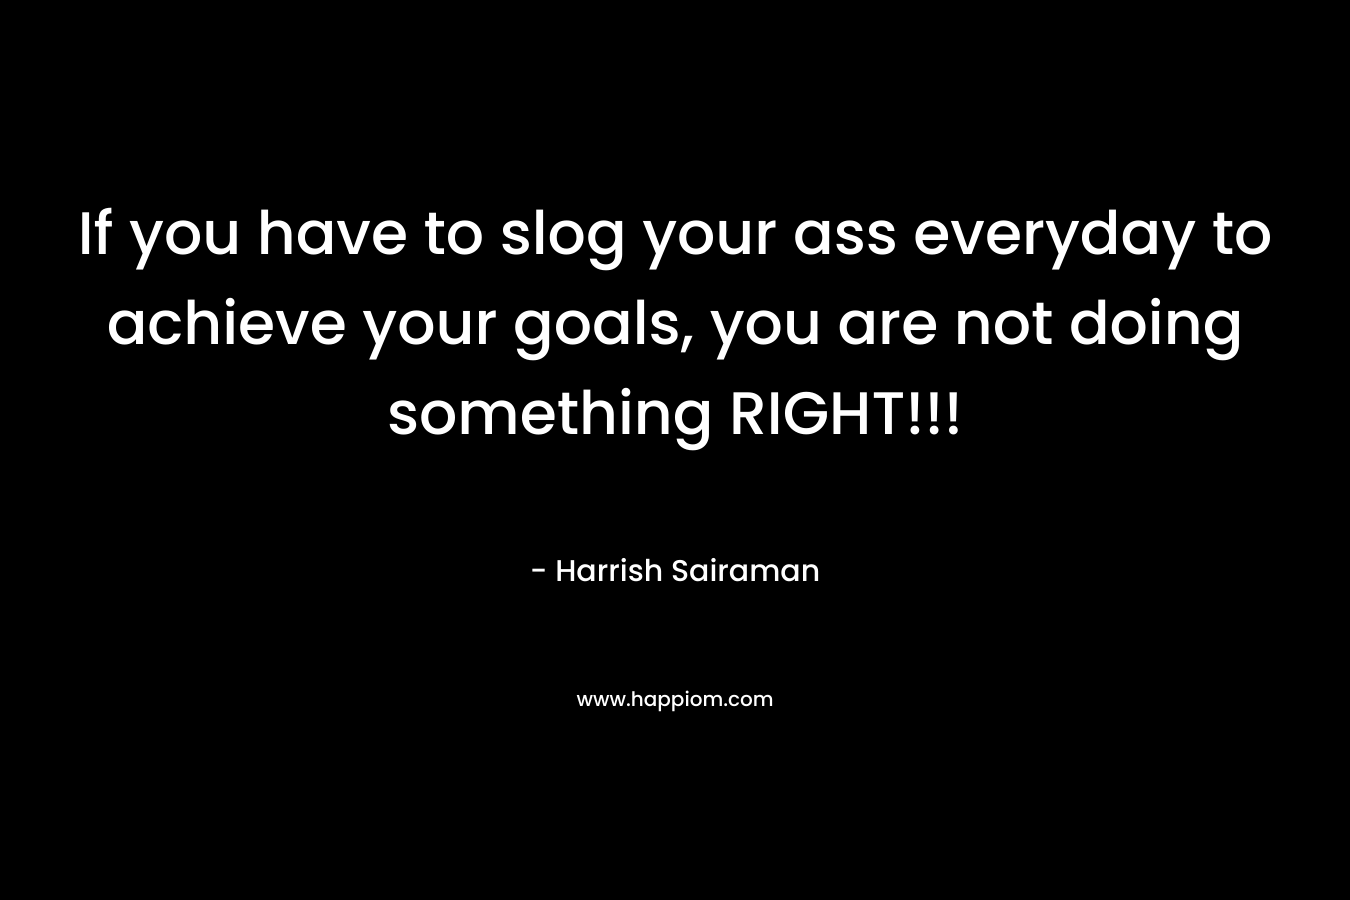 If you have to slog your ass everyday to achieve your goals, you are not doing something RIGHT!!!